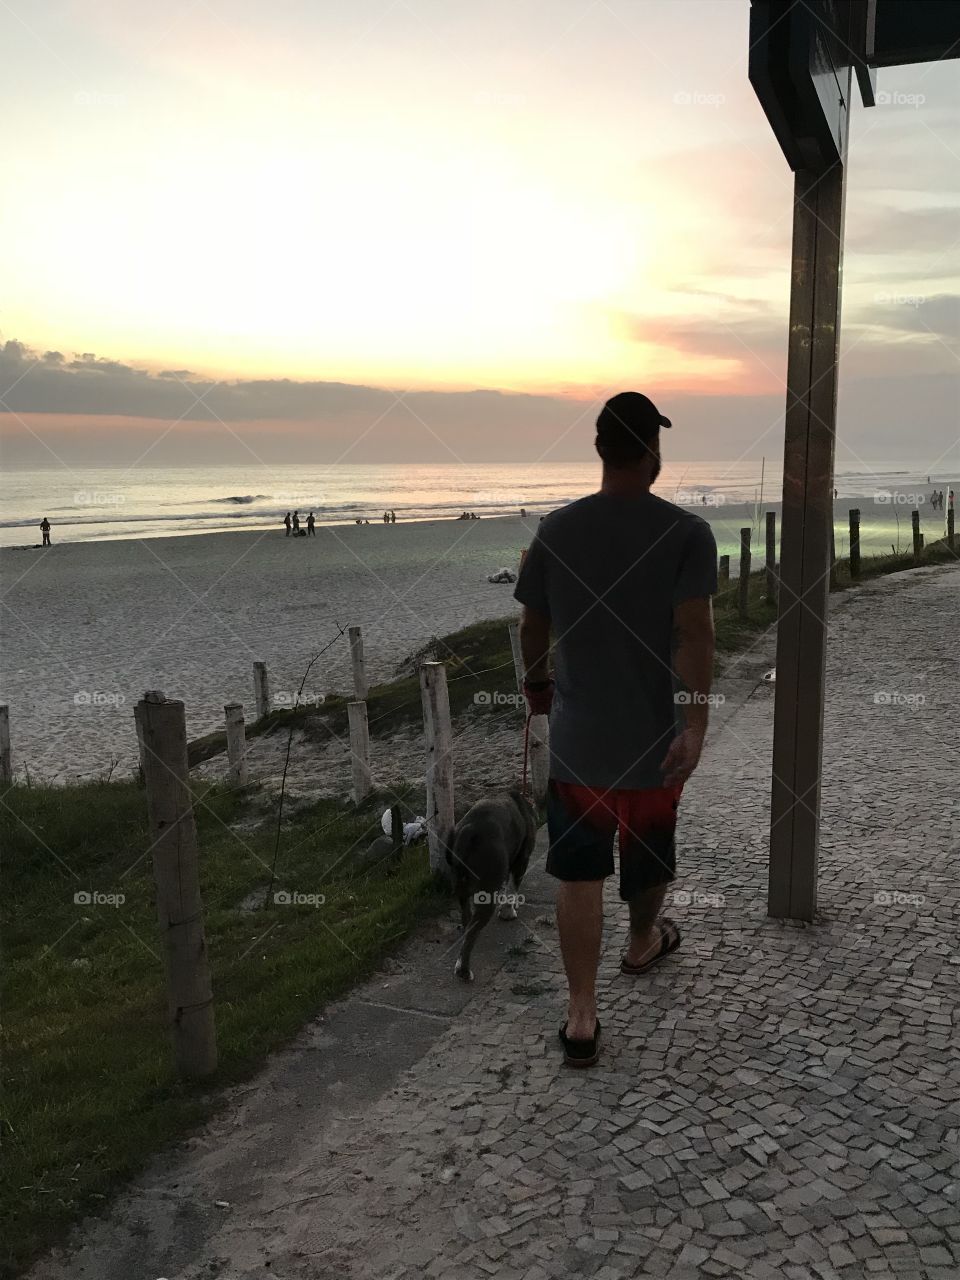 walking on the beach with the dog